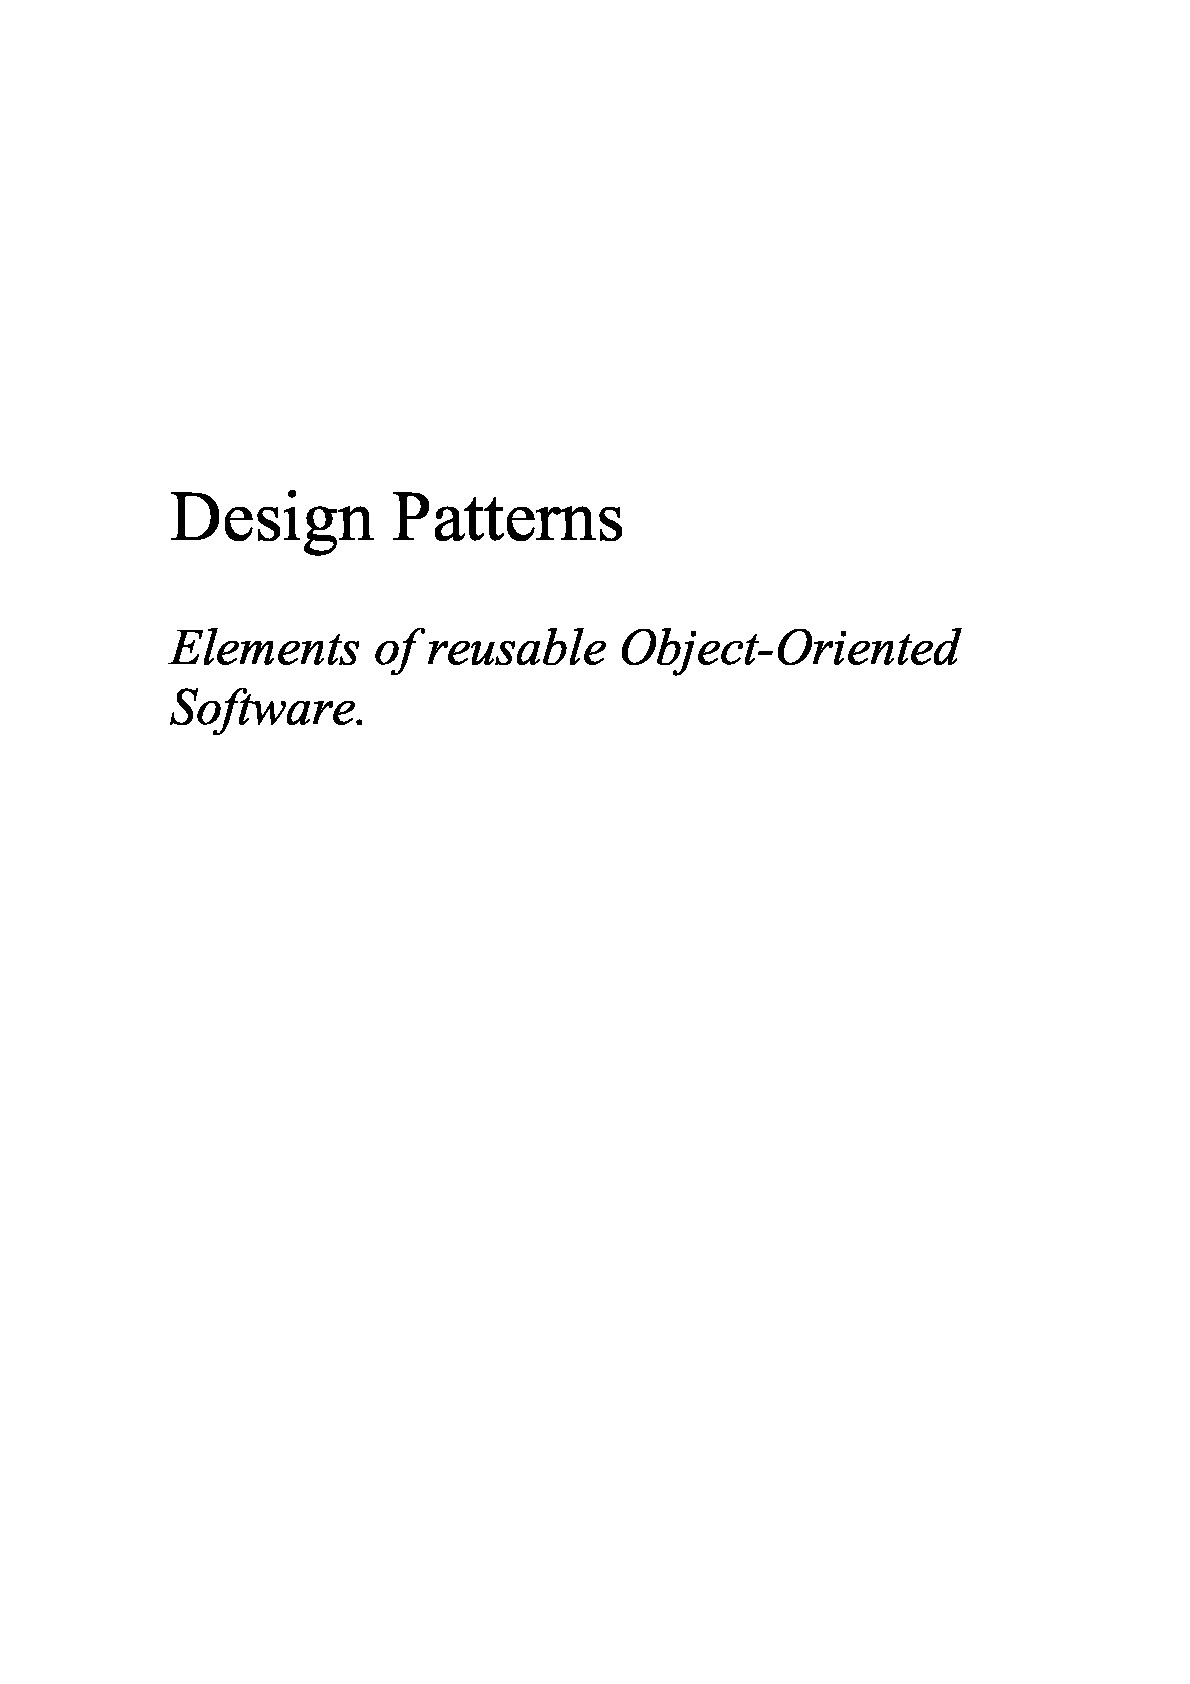 Design Patterns, Elements of Reusable Object-Oriented Software